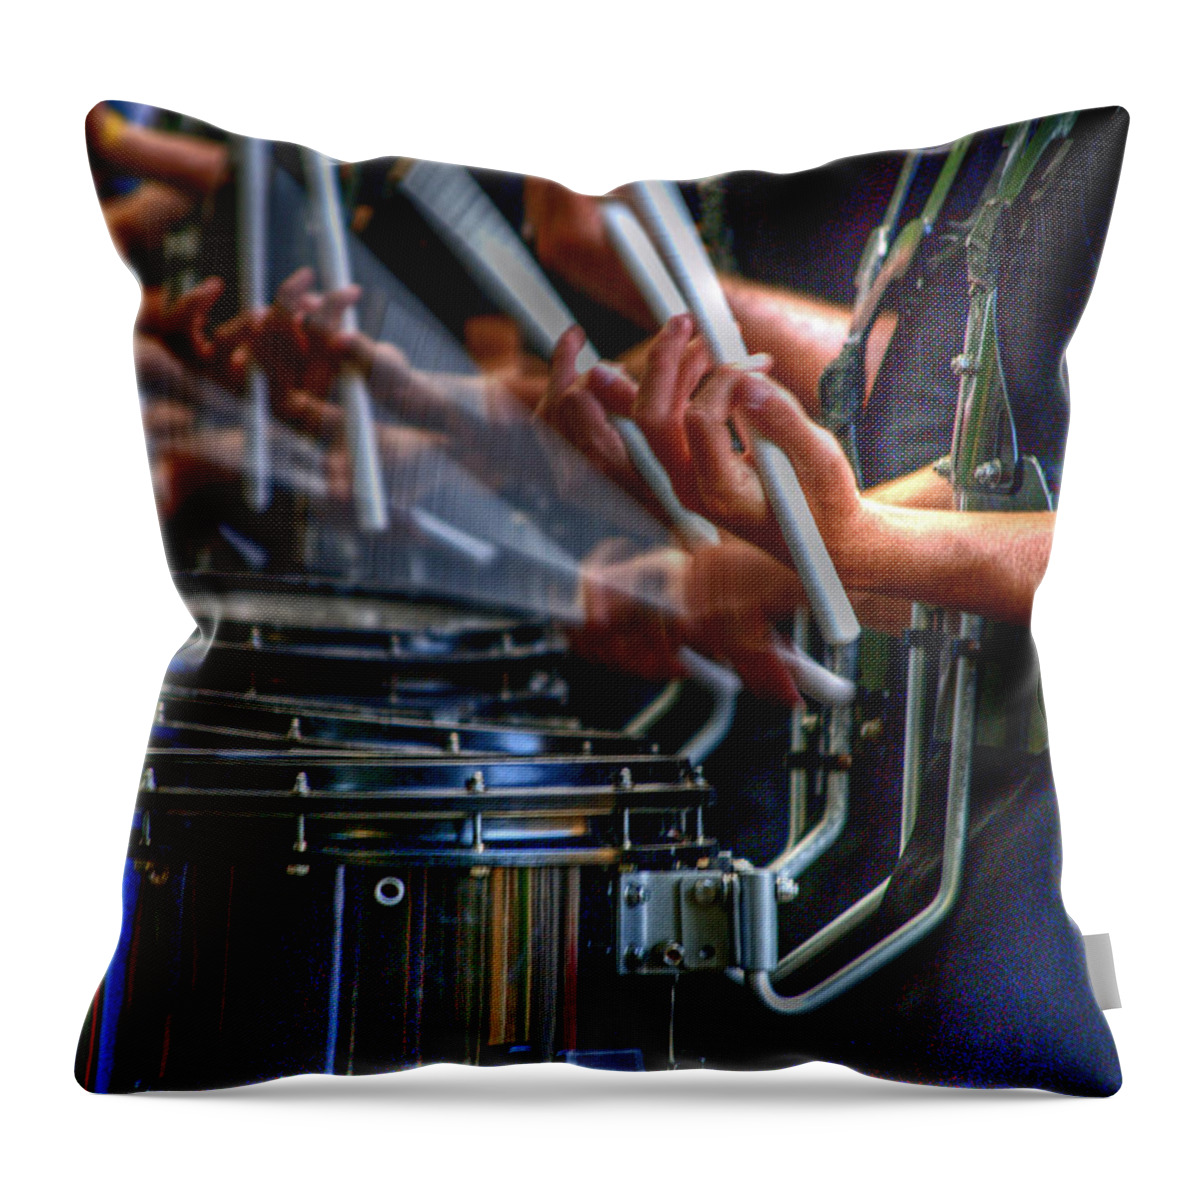 People Throw Pillow featuring the photograph Sound Of Drummer by Copyright © Steve Grundy (stgrundy)